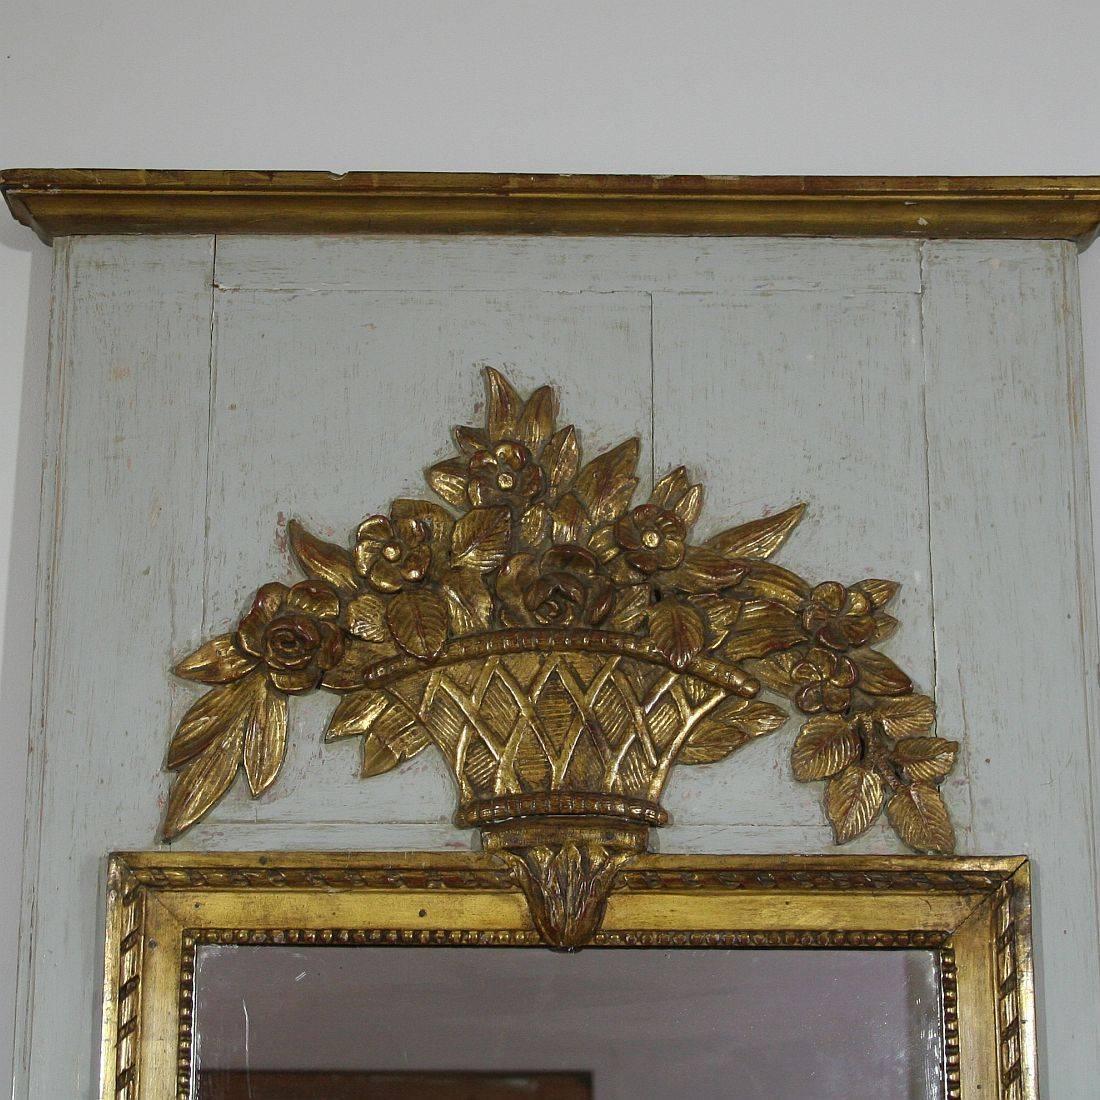 Beautiful 19th century trumeau mirror with great weathered look and hand-carved ornaments, France, circa 1800-1850
Weathered, small losses. Original mirror glass.


